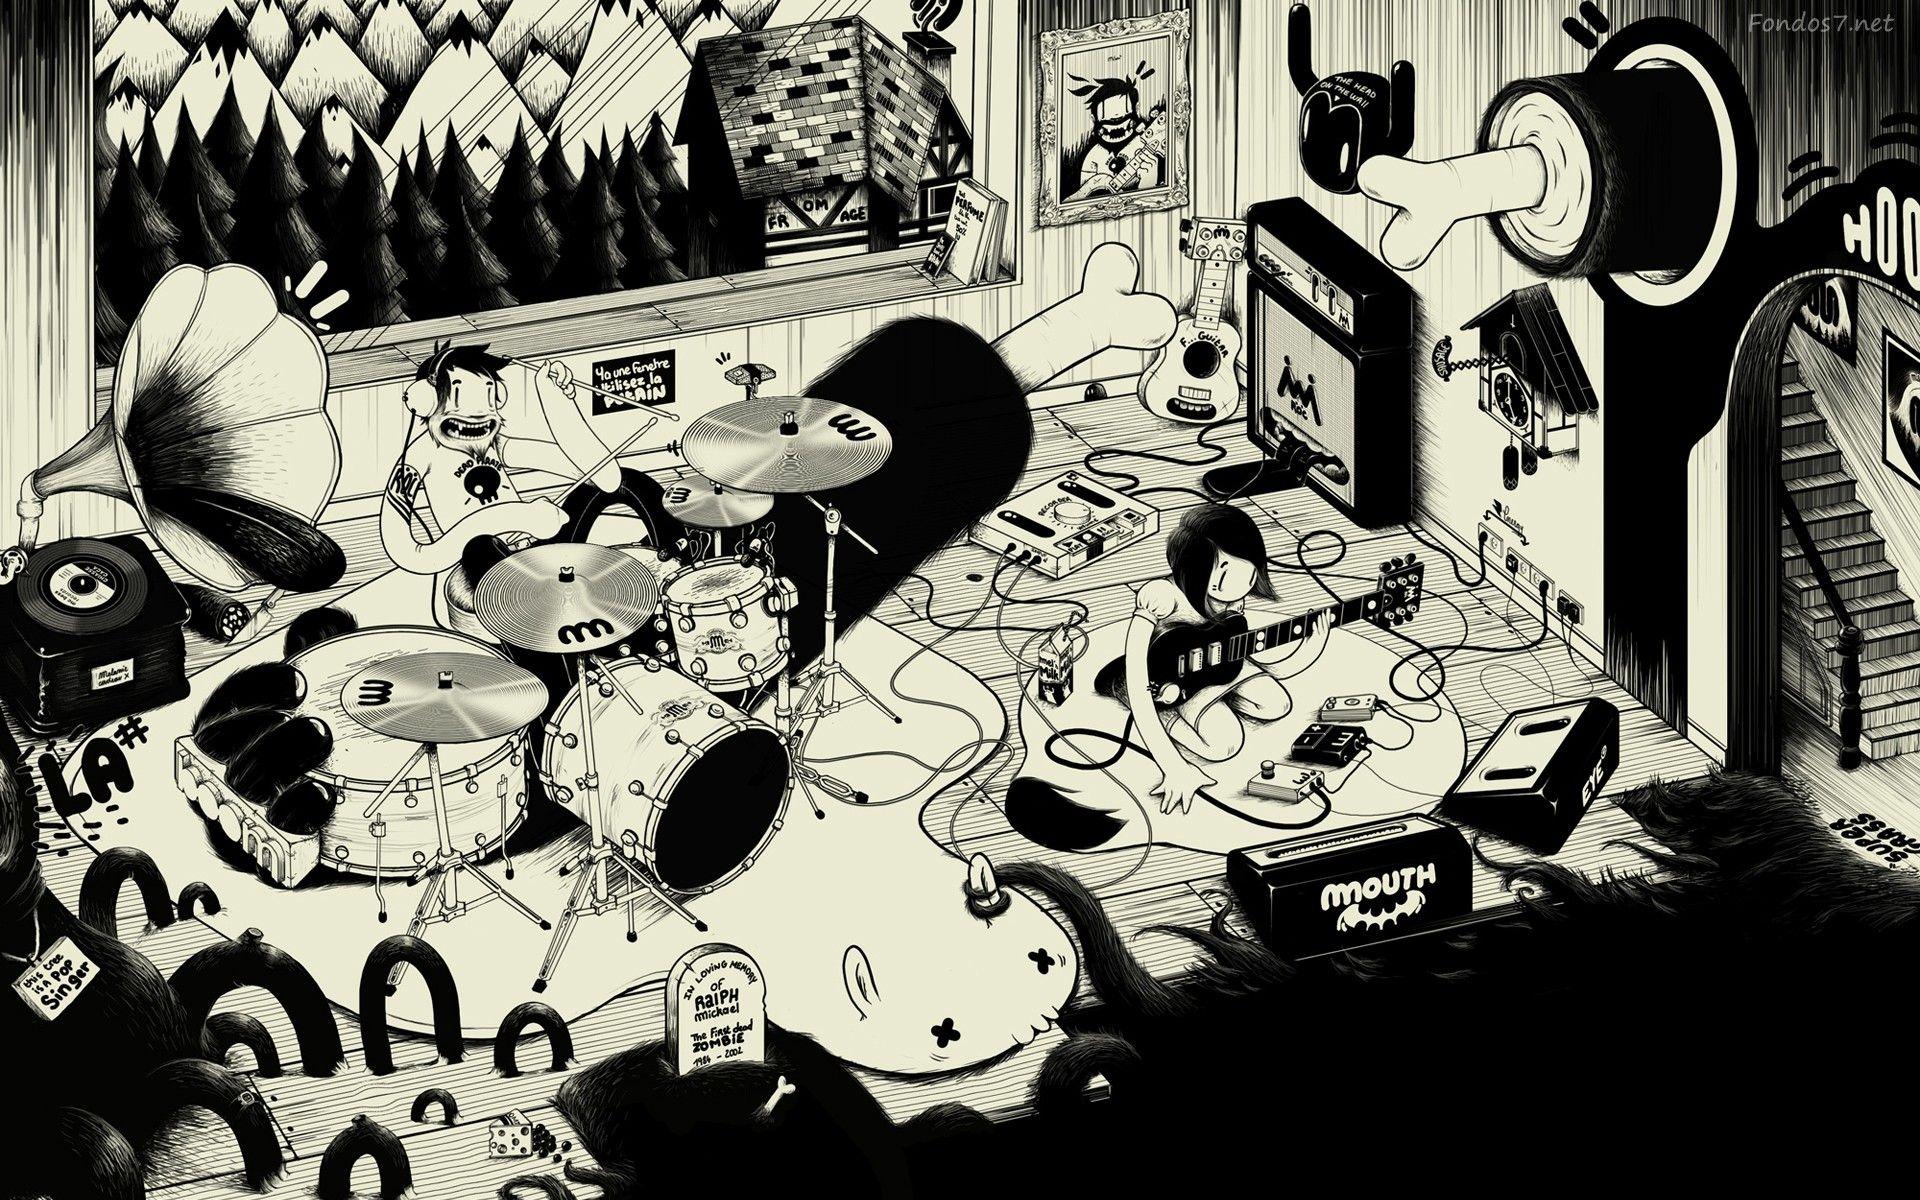 The illustration is a black and white ink drawing of a room with a band playing. The room is filled with various objects such as a TV, a clock, a bookshelf, a gramophone, a suitcase, a guitar, a drum set, a keyboard, a microphone, a picture frame, a bottle, a cup, a vase, a clock, a TV, a book, a pencil, a pen, a clock, a bottle, a cup, a vase, a clock, a TV, a book, a pencil, a pen, a clock, a bottle, a cup, a vase, a clock, a TV, a book, a pencil, a pen, a clock, a bottle, a cup, a vase, a clock, a TV, a book, a pencil, a pen, a clock, a bottle, a cup, a vase, a clock, a TV, a book, a pencil, a pen, a clock, a bottle, a cup, a vase, a clock, a TV, a book, a pencil, a pen, a clock, a bottle, a cup, a vase, a clock, a TV, a book, a pencil, a pen, a clock, a bottle, a cup, a vase, a clock, a TV, a book, a pencil, a pen, a clock, a bottle, a cup, a vase, a clock, a TV, a book, a pencil, a pen, a clock, a bottle, a cup, a vase, a clock, a TV, a book, a pencil, a pen, a clock, a bottle, a cup, a vase, a clock, a TV, a book, a pencil, a pen, a clock, a bottle, a cup, a vase, a clock, a TV, a book, a pencil, a pen, a clock, a bottle, a cup, a vase, a clock, a TV, a book, a pencil, a pen, a clock, a bottle, a cup, a vase, a clock, a TV, a book, a pencil, a pen, a clock, a bottle, a cup, a vase, a clock, a TV, a book, a pencil, a pen, a clock, a bottle, a cup, a vase, a clock, a TV, a book, a pencil, a pen, a clock, a bottle, a cup, a vase, a clock, a TV, a book, a - Punk